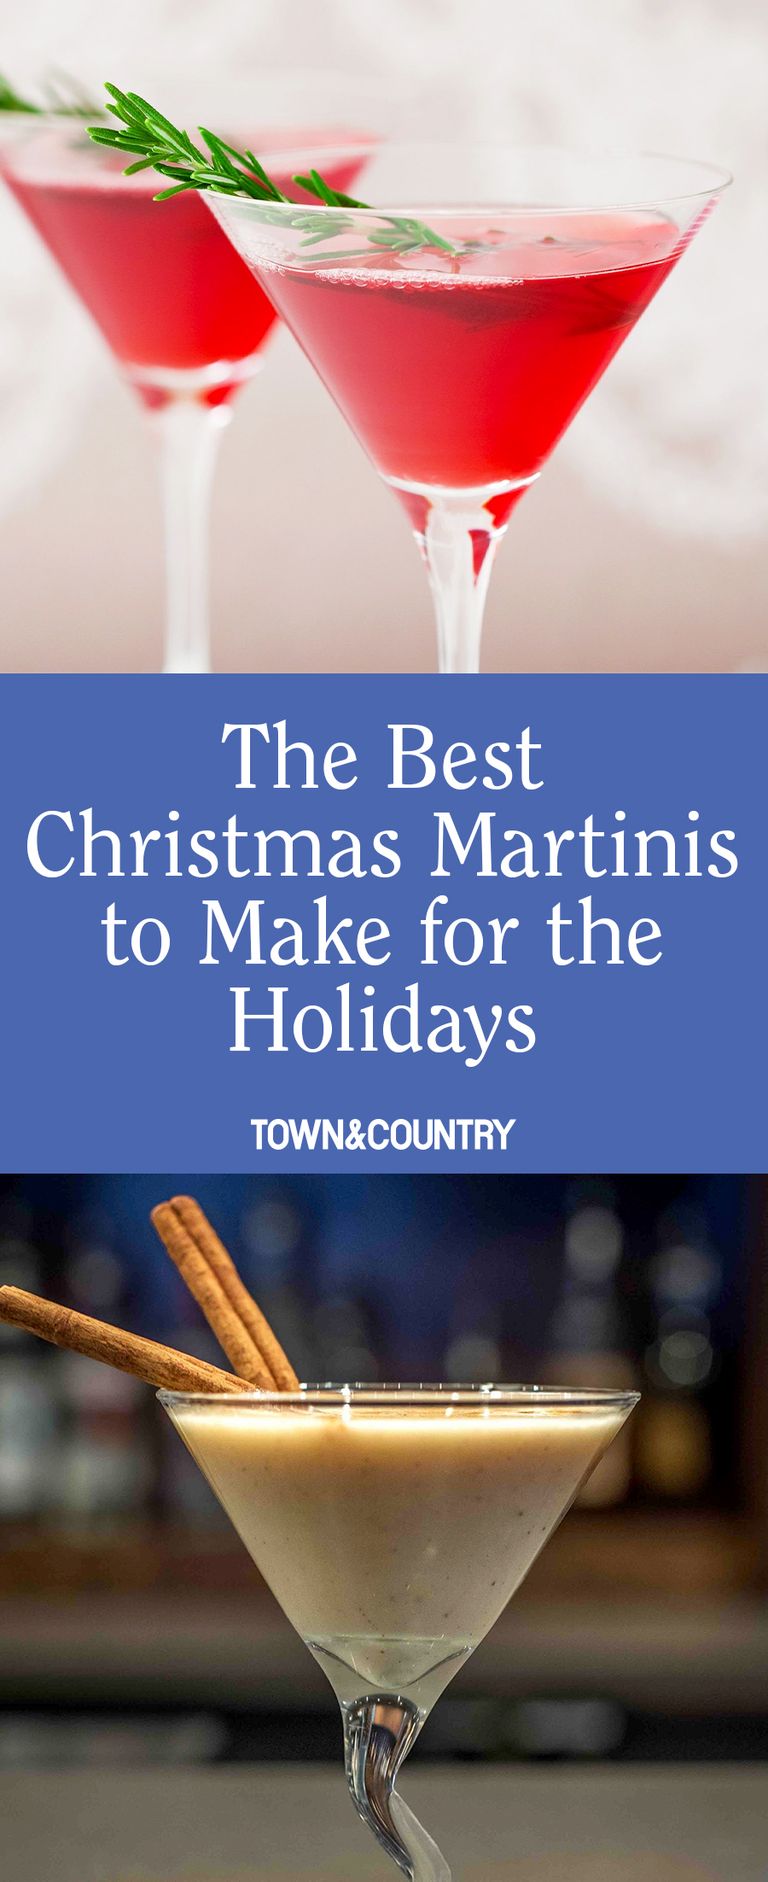 9 Best Christmas Martinis - Holiday Martini Recipes for Christmas Parties